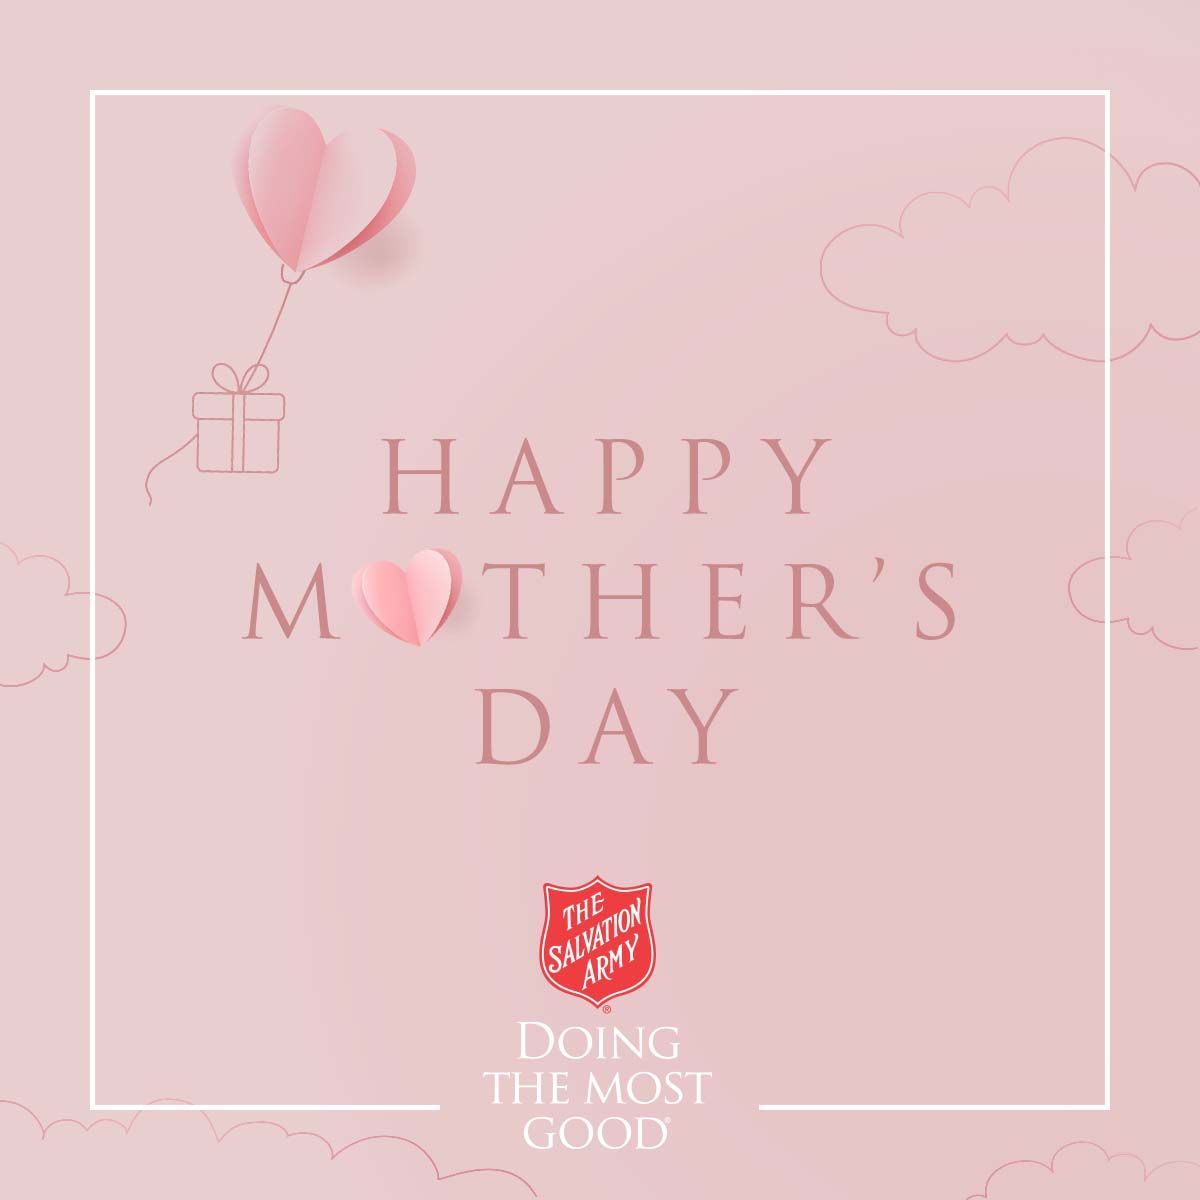 Happy Mother's Day from all of us at The Salvation Army! ❤️